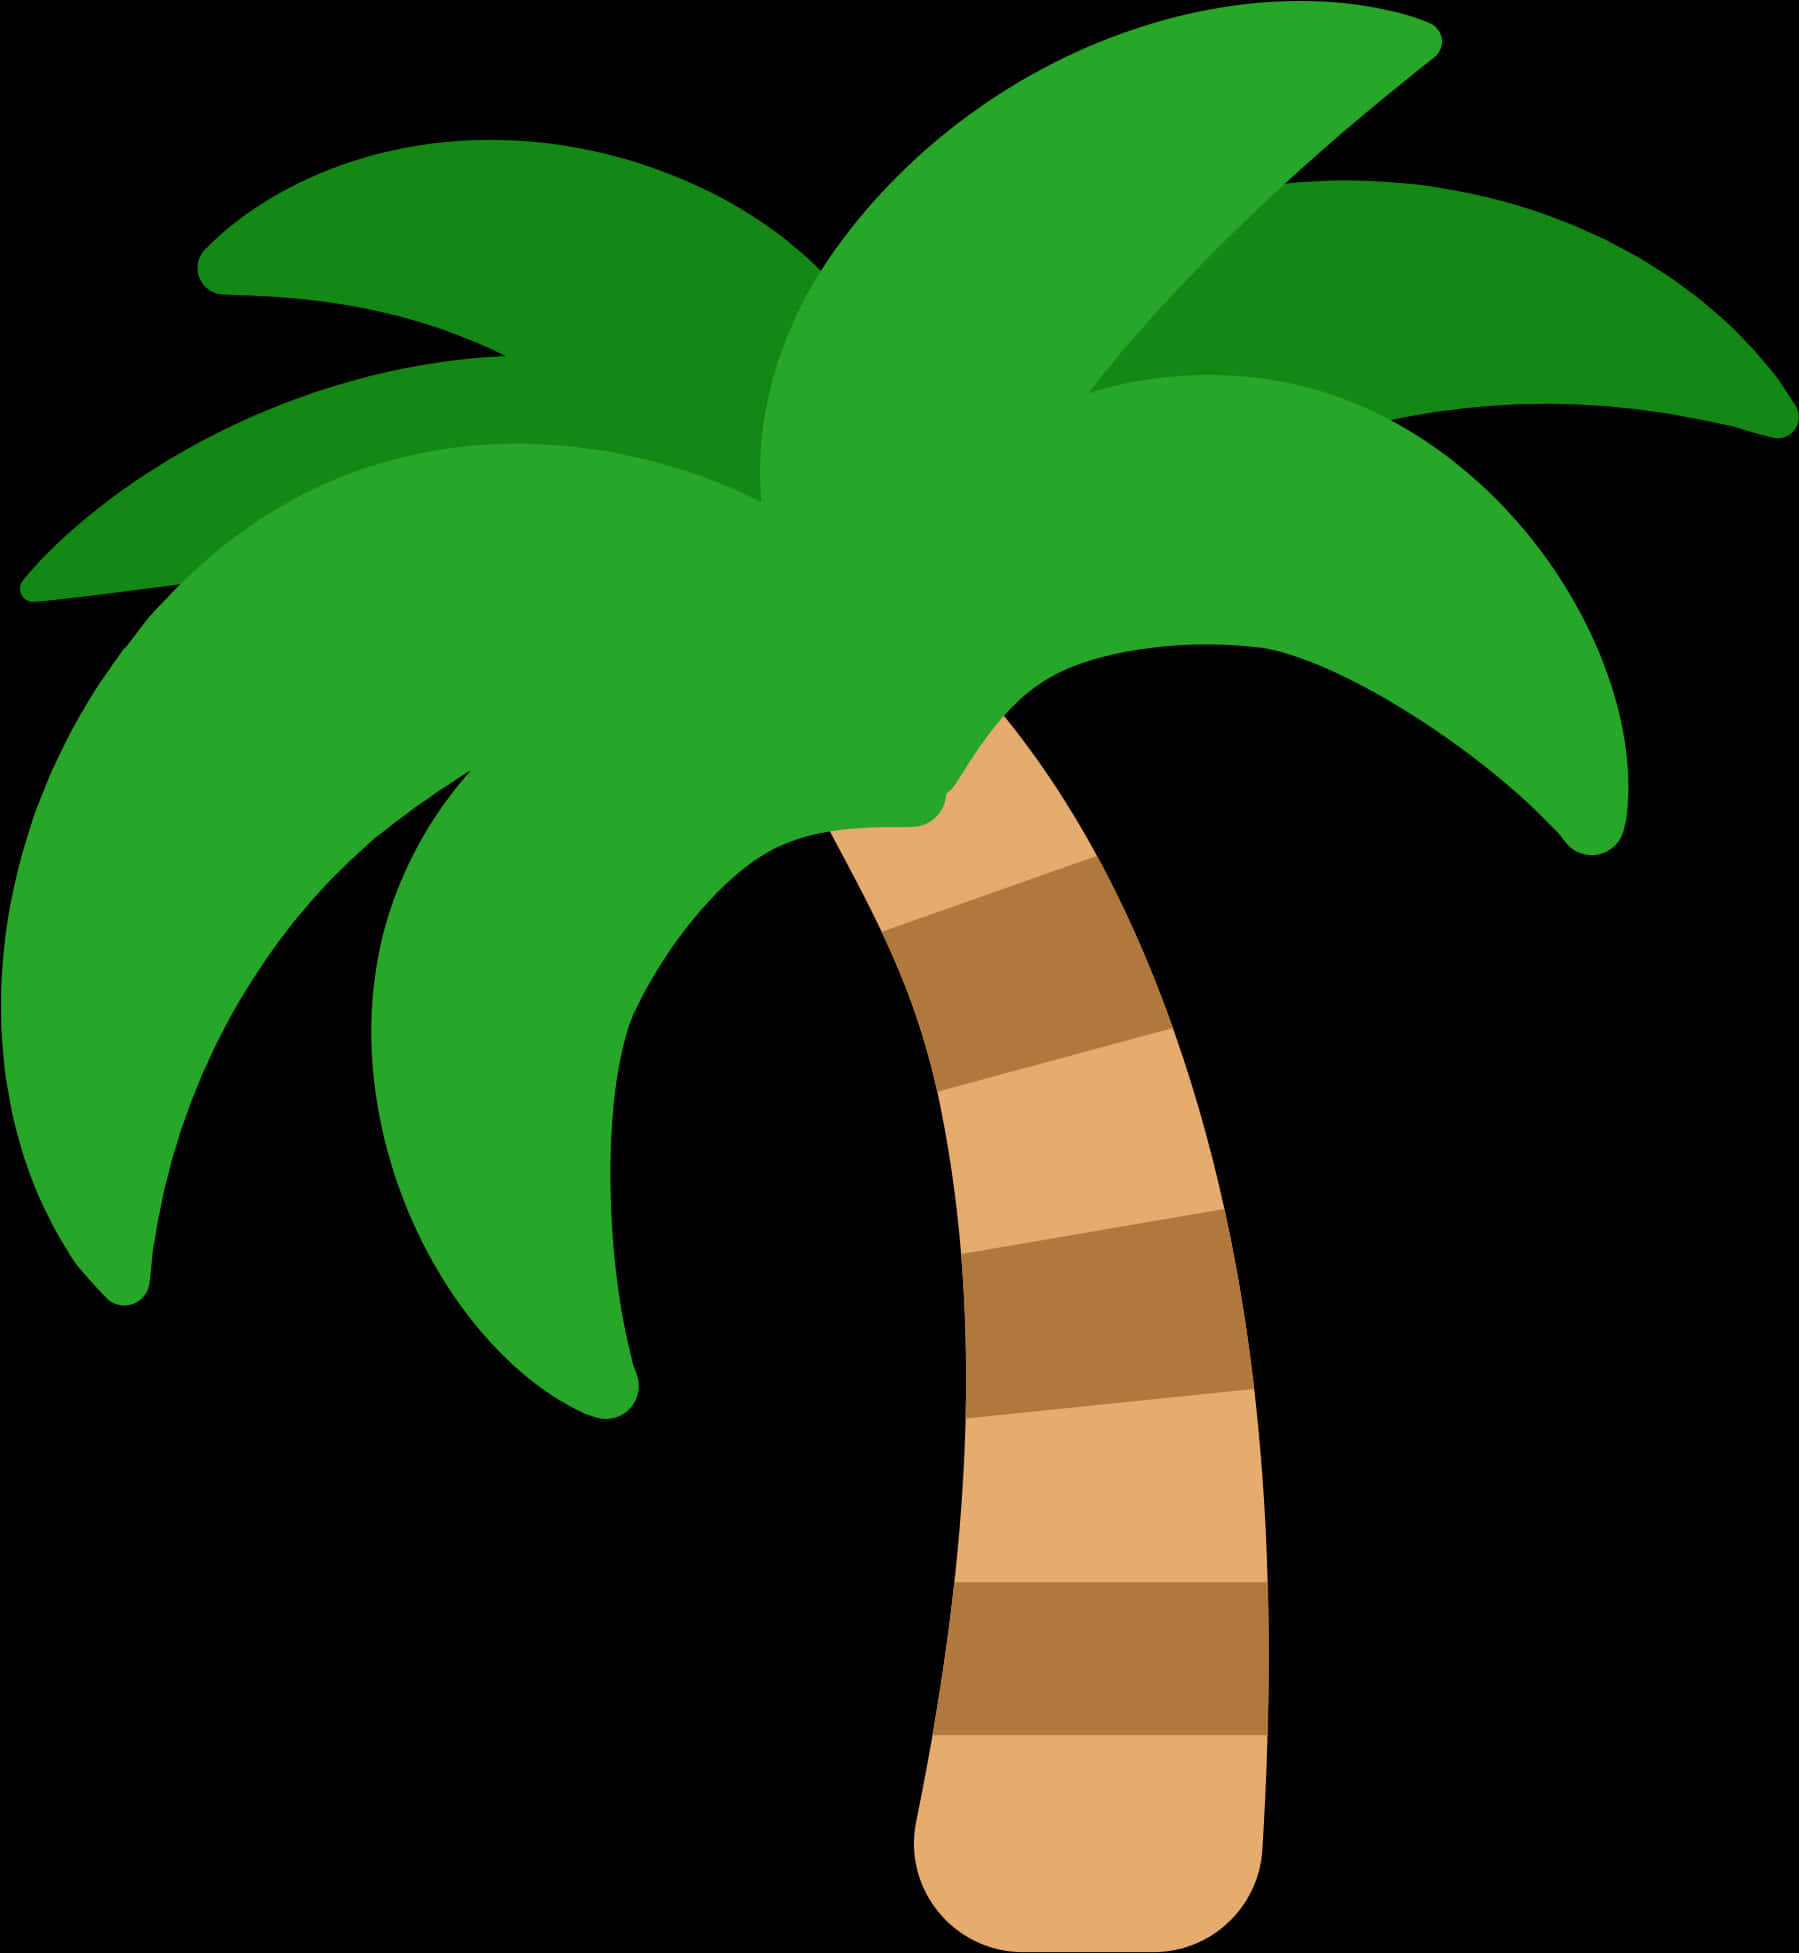 A Green Palm Tree With Brown Stripes